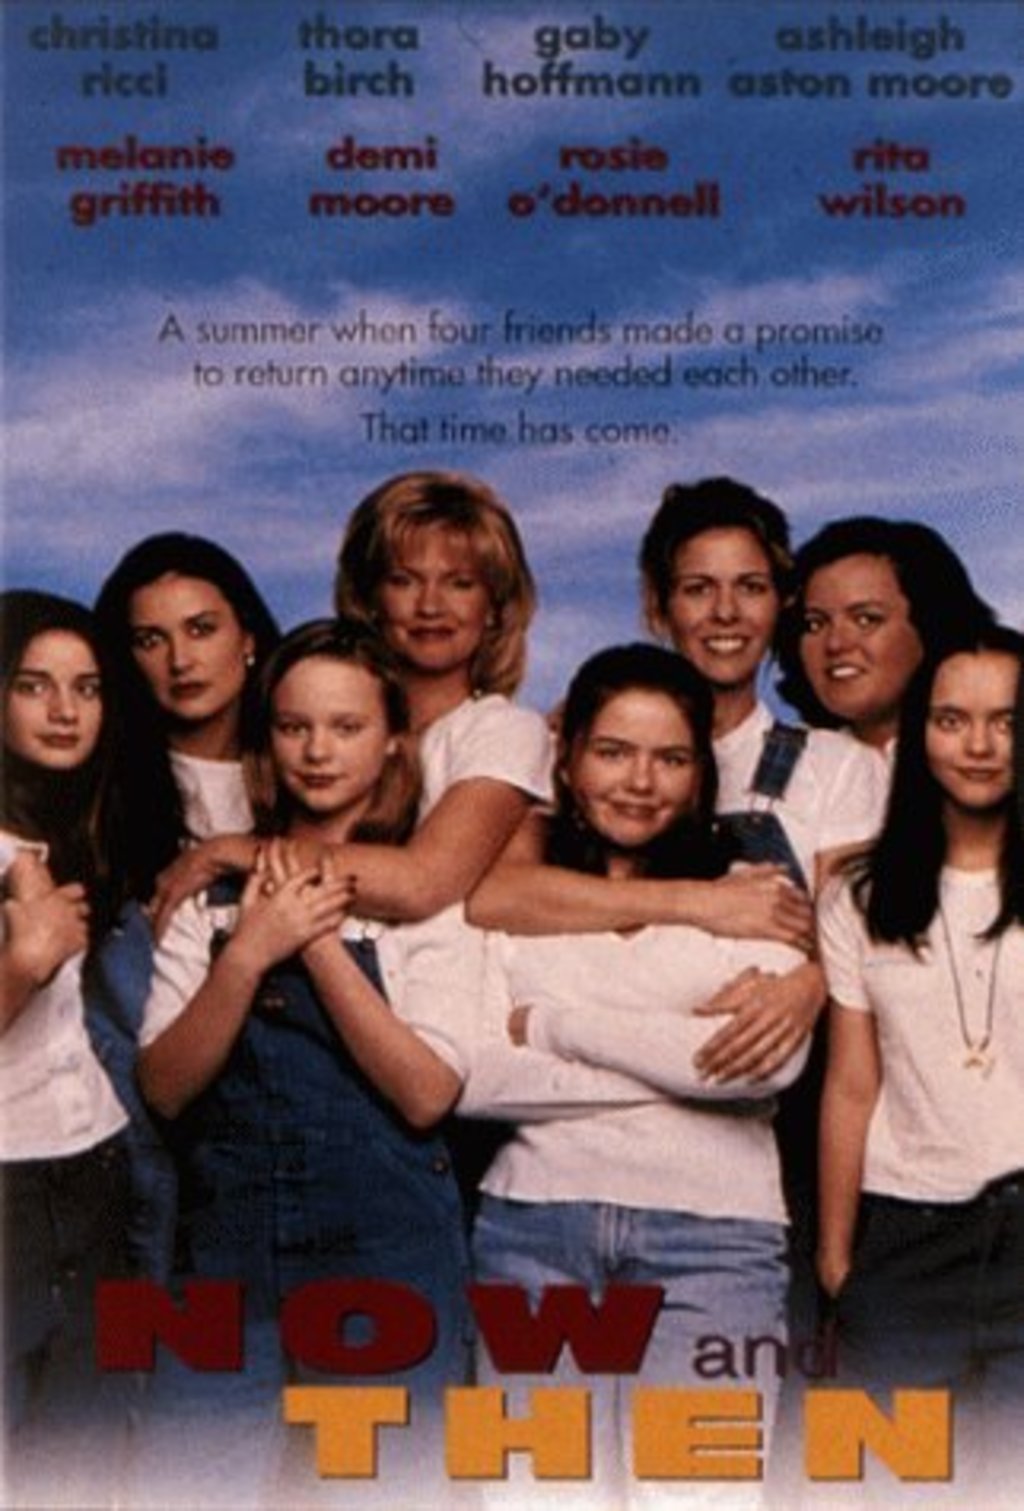 Watch Now and Then on Netflix Today! | NetflixMovies.com